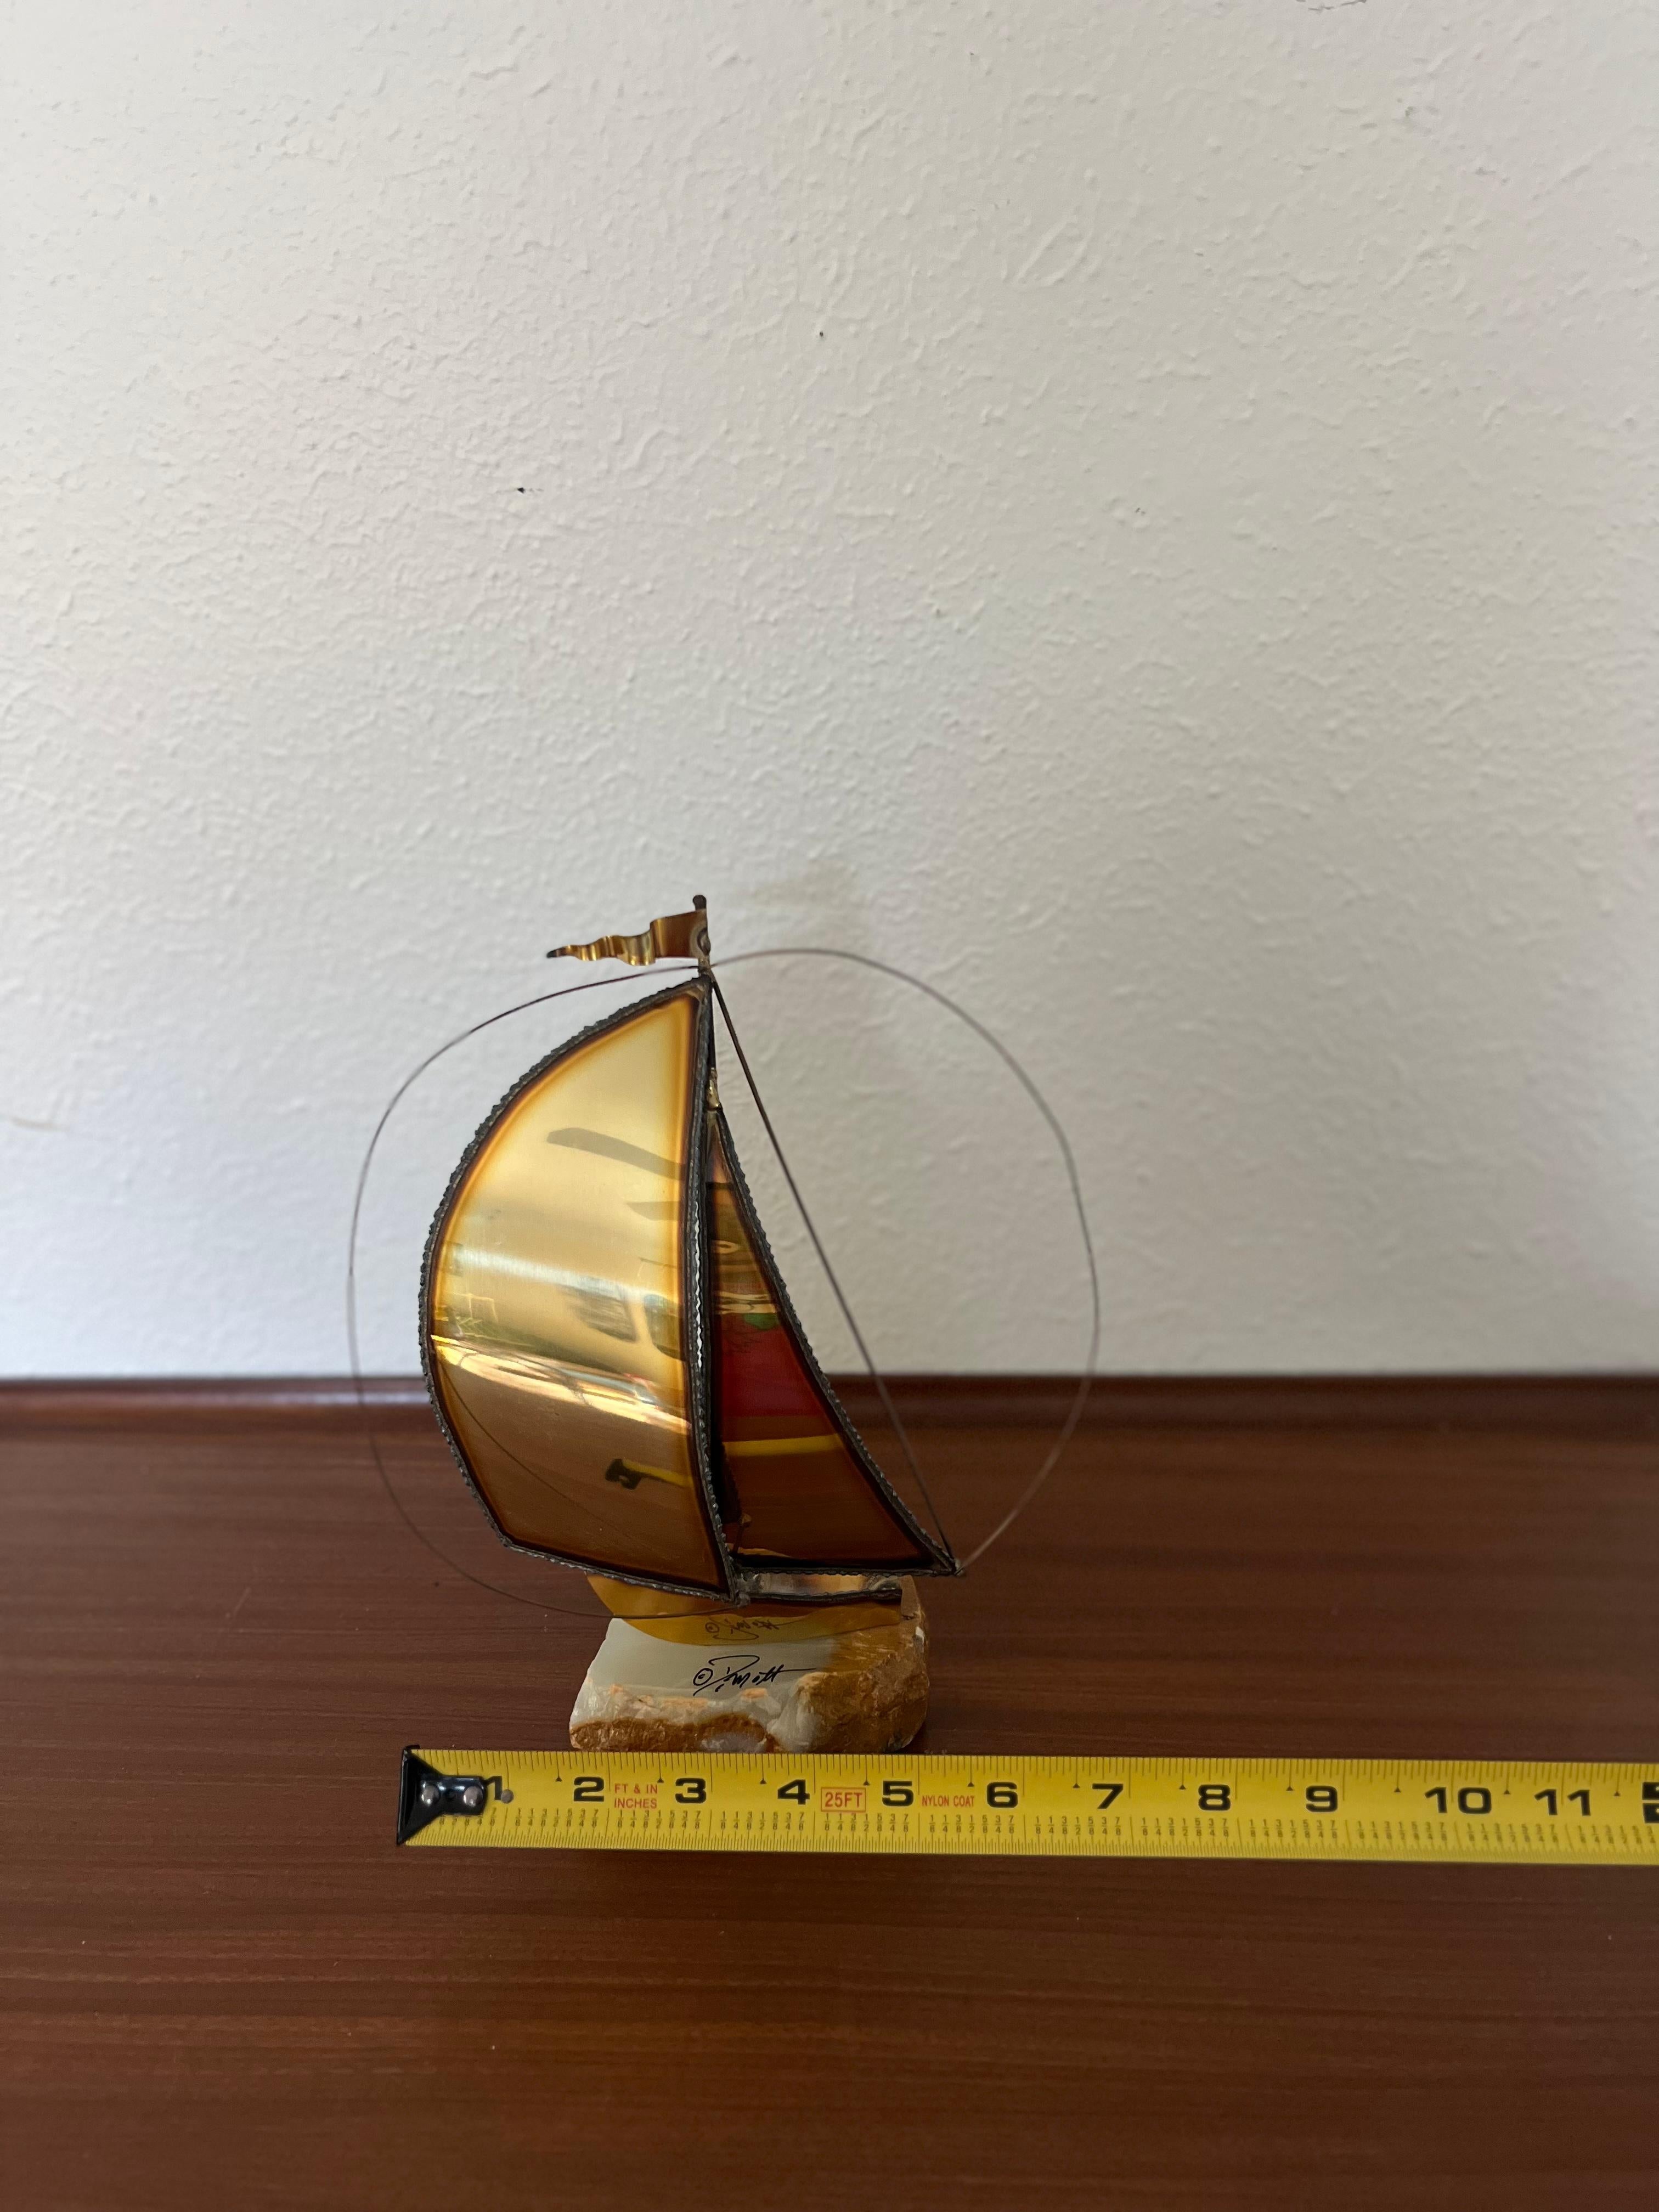 Vintage Mid-Century Modern Onyx and Brass Sailboat, Signed by Artist For Sale 3